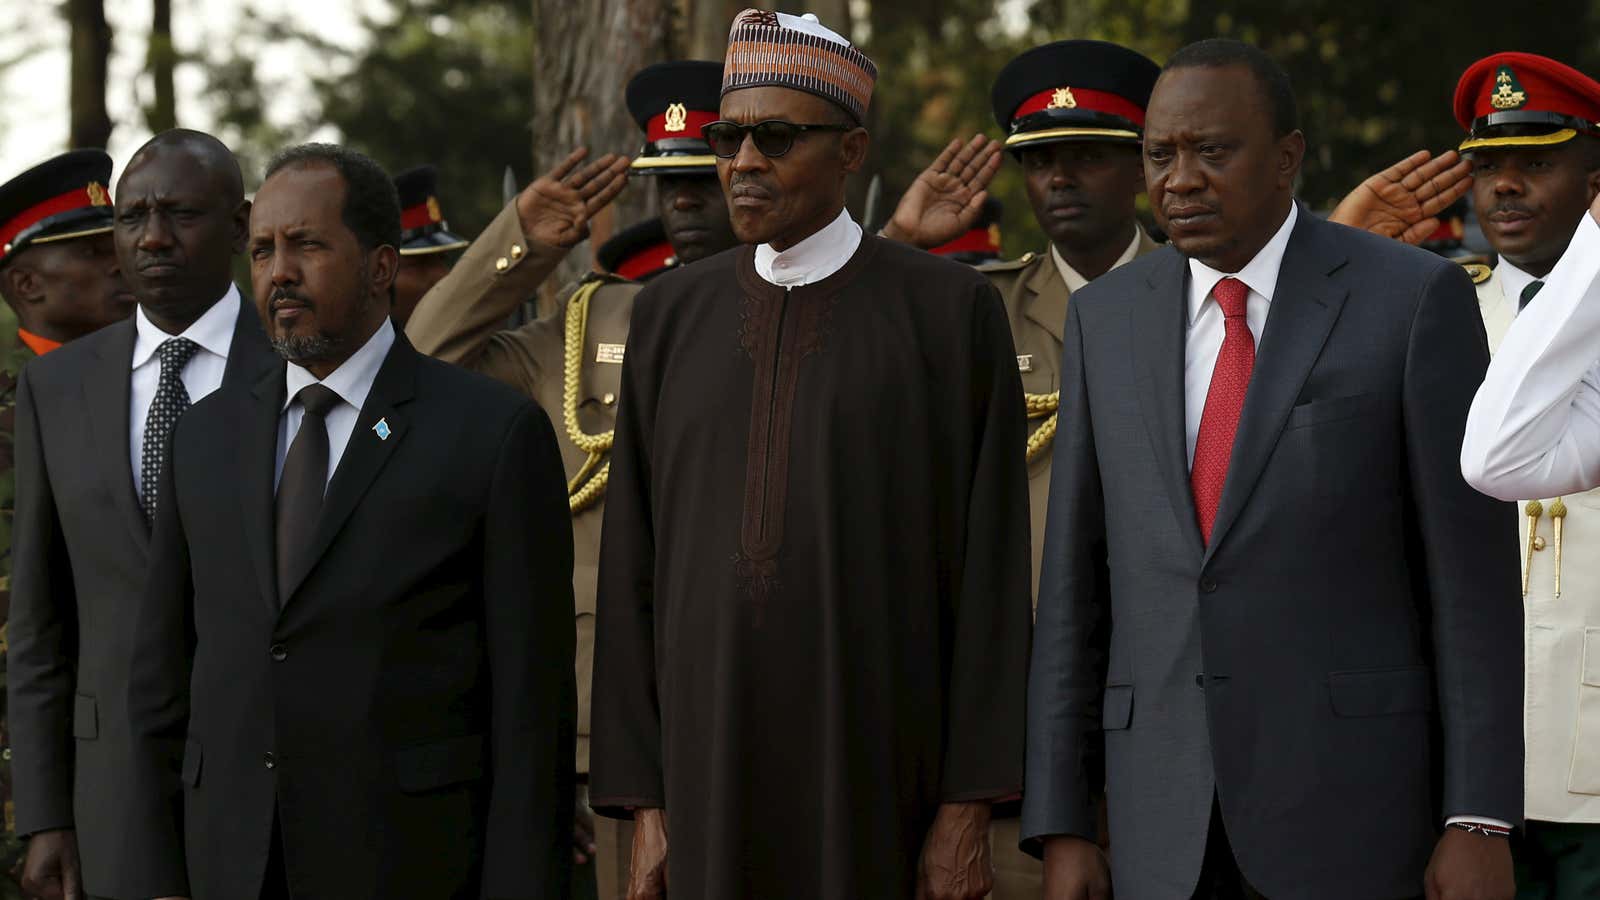 Buhari and Kenyatta can learn from each other